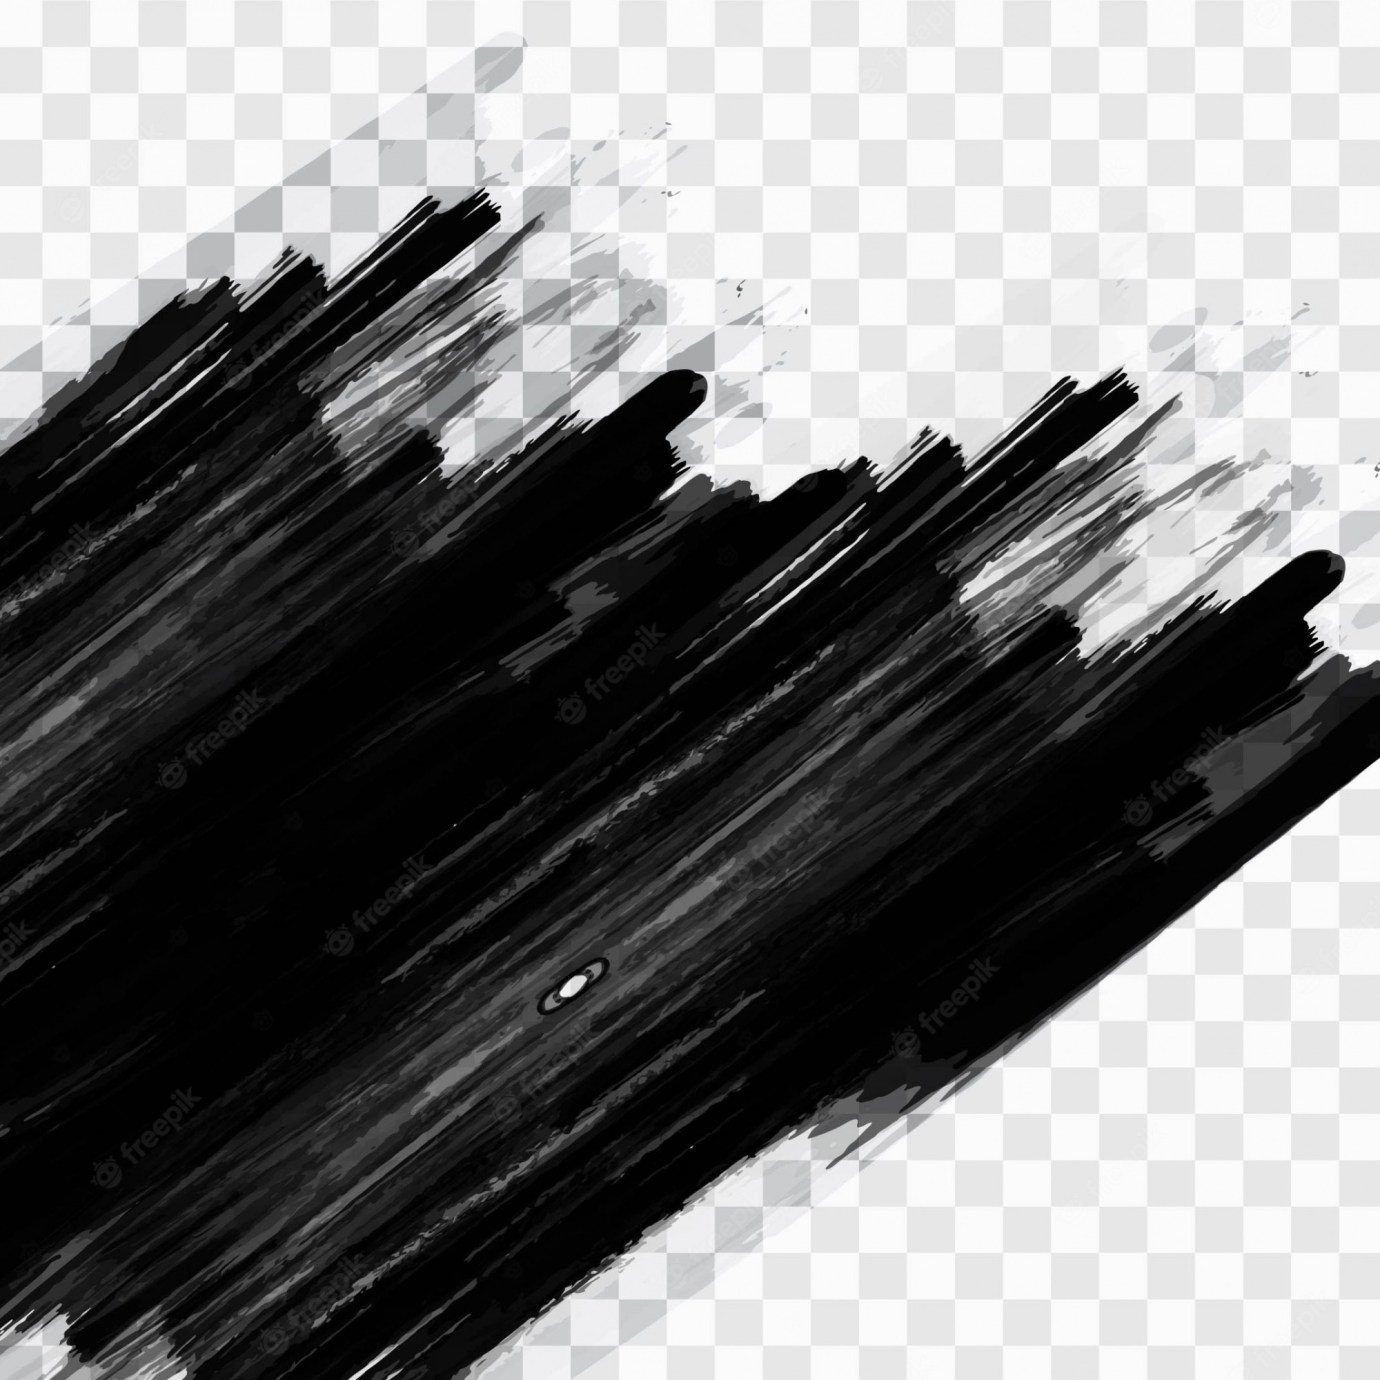 Picture of: Brush Stroke Png Images – Free Download on Freepik